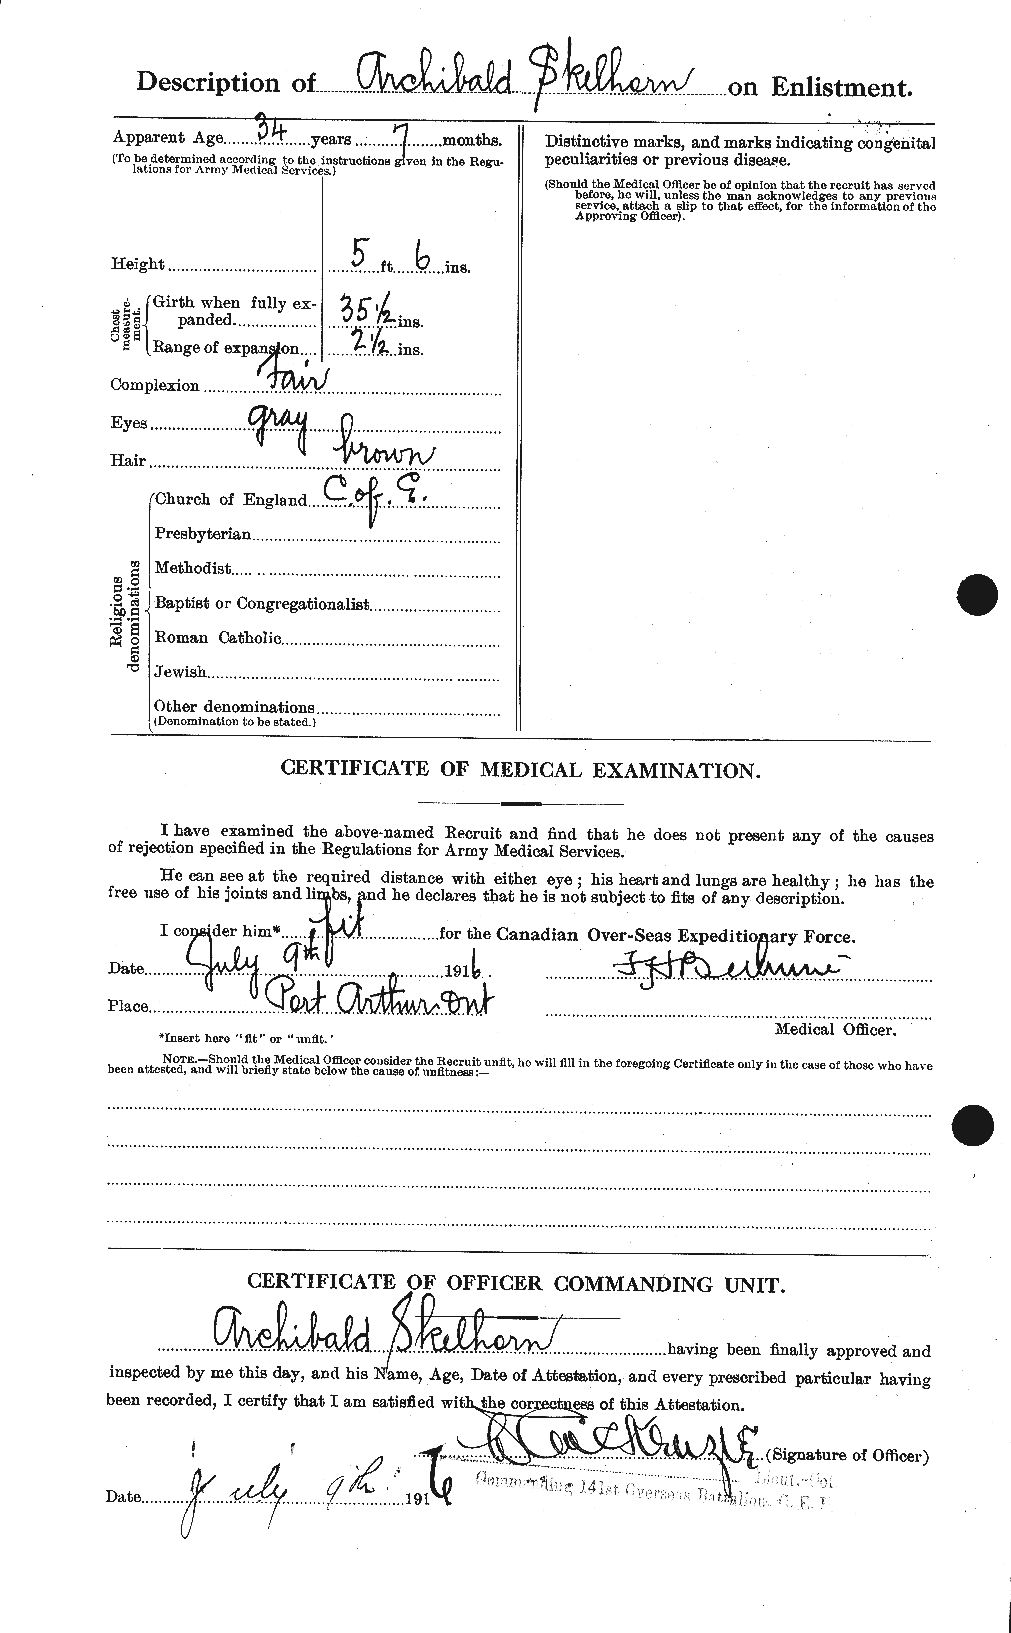 Personnel Records of the First World War - CEF 100483b